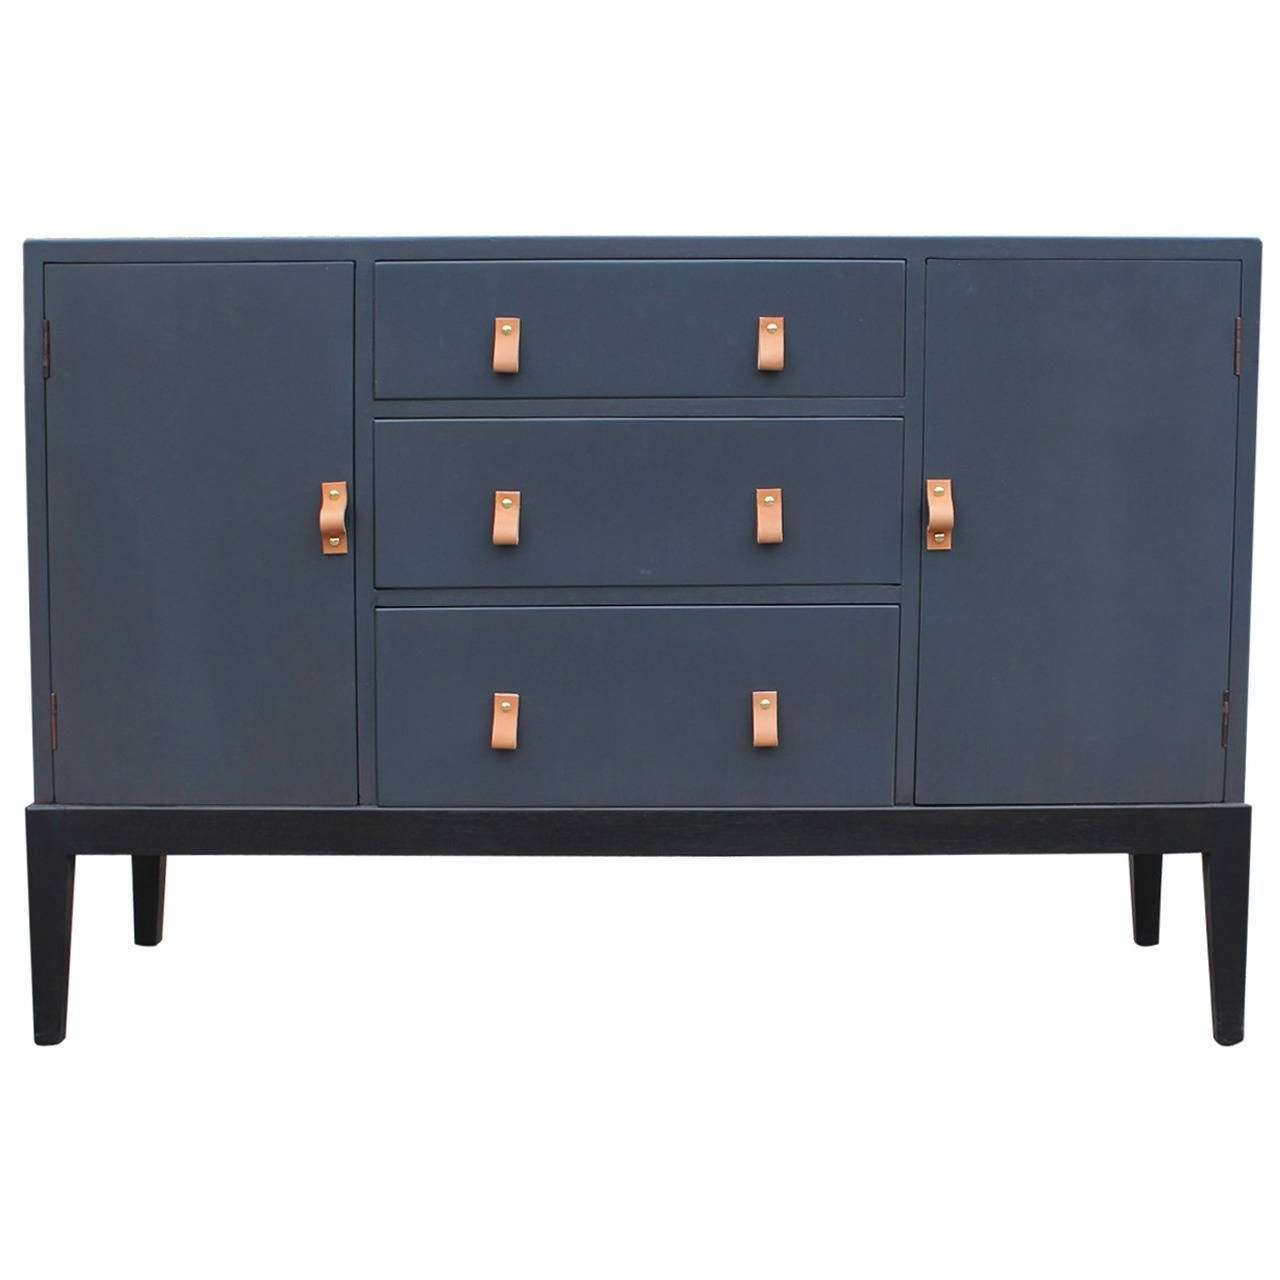 Superb Grey Sideboard Or Buffet With Leather Handles At 1stdibs In Grey Sideboards (View 4 of 20)